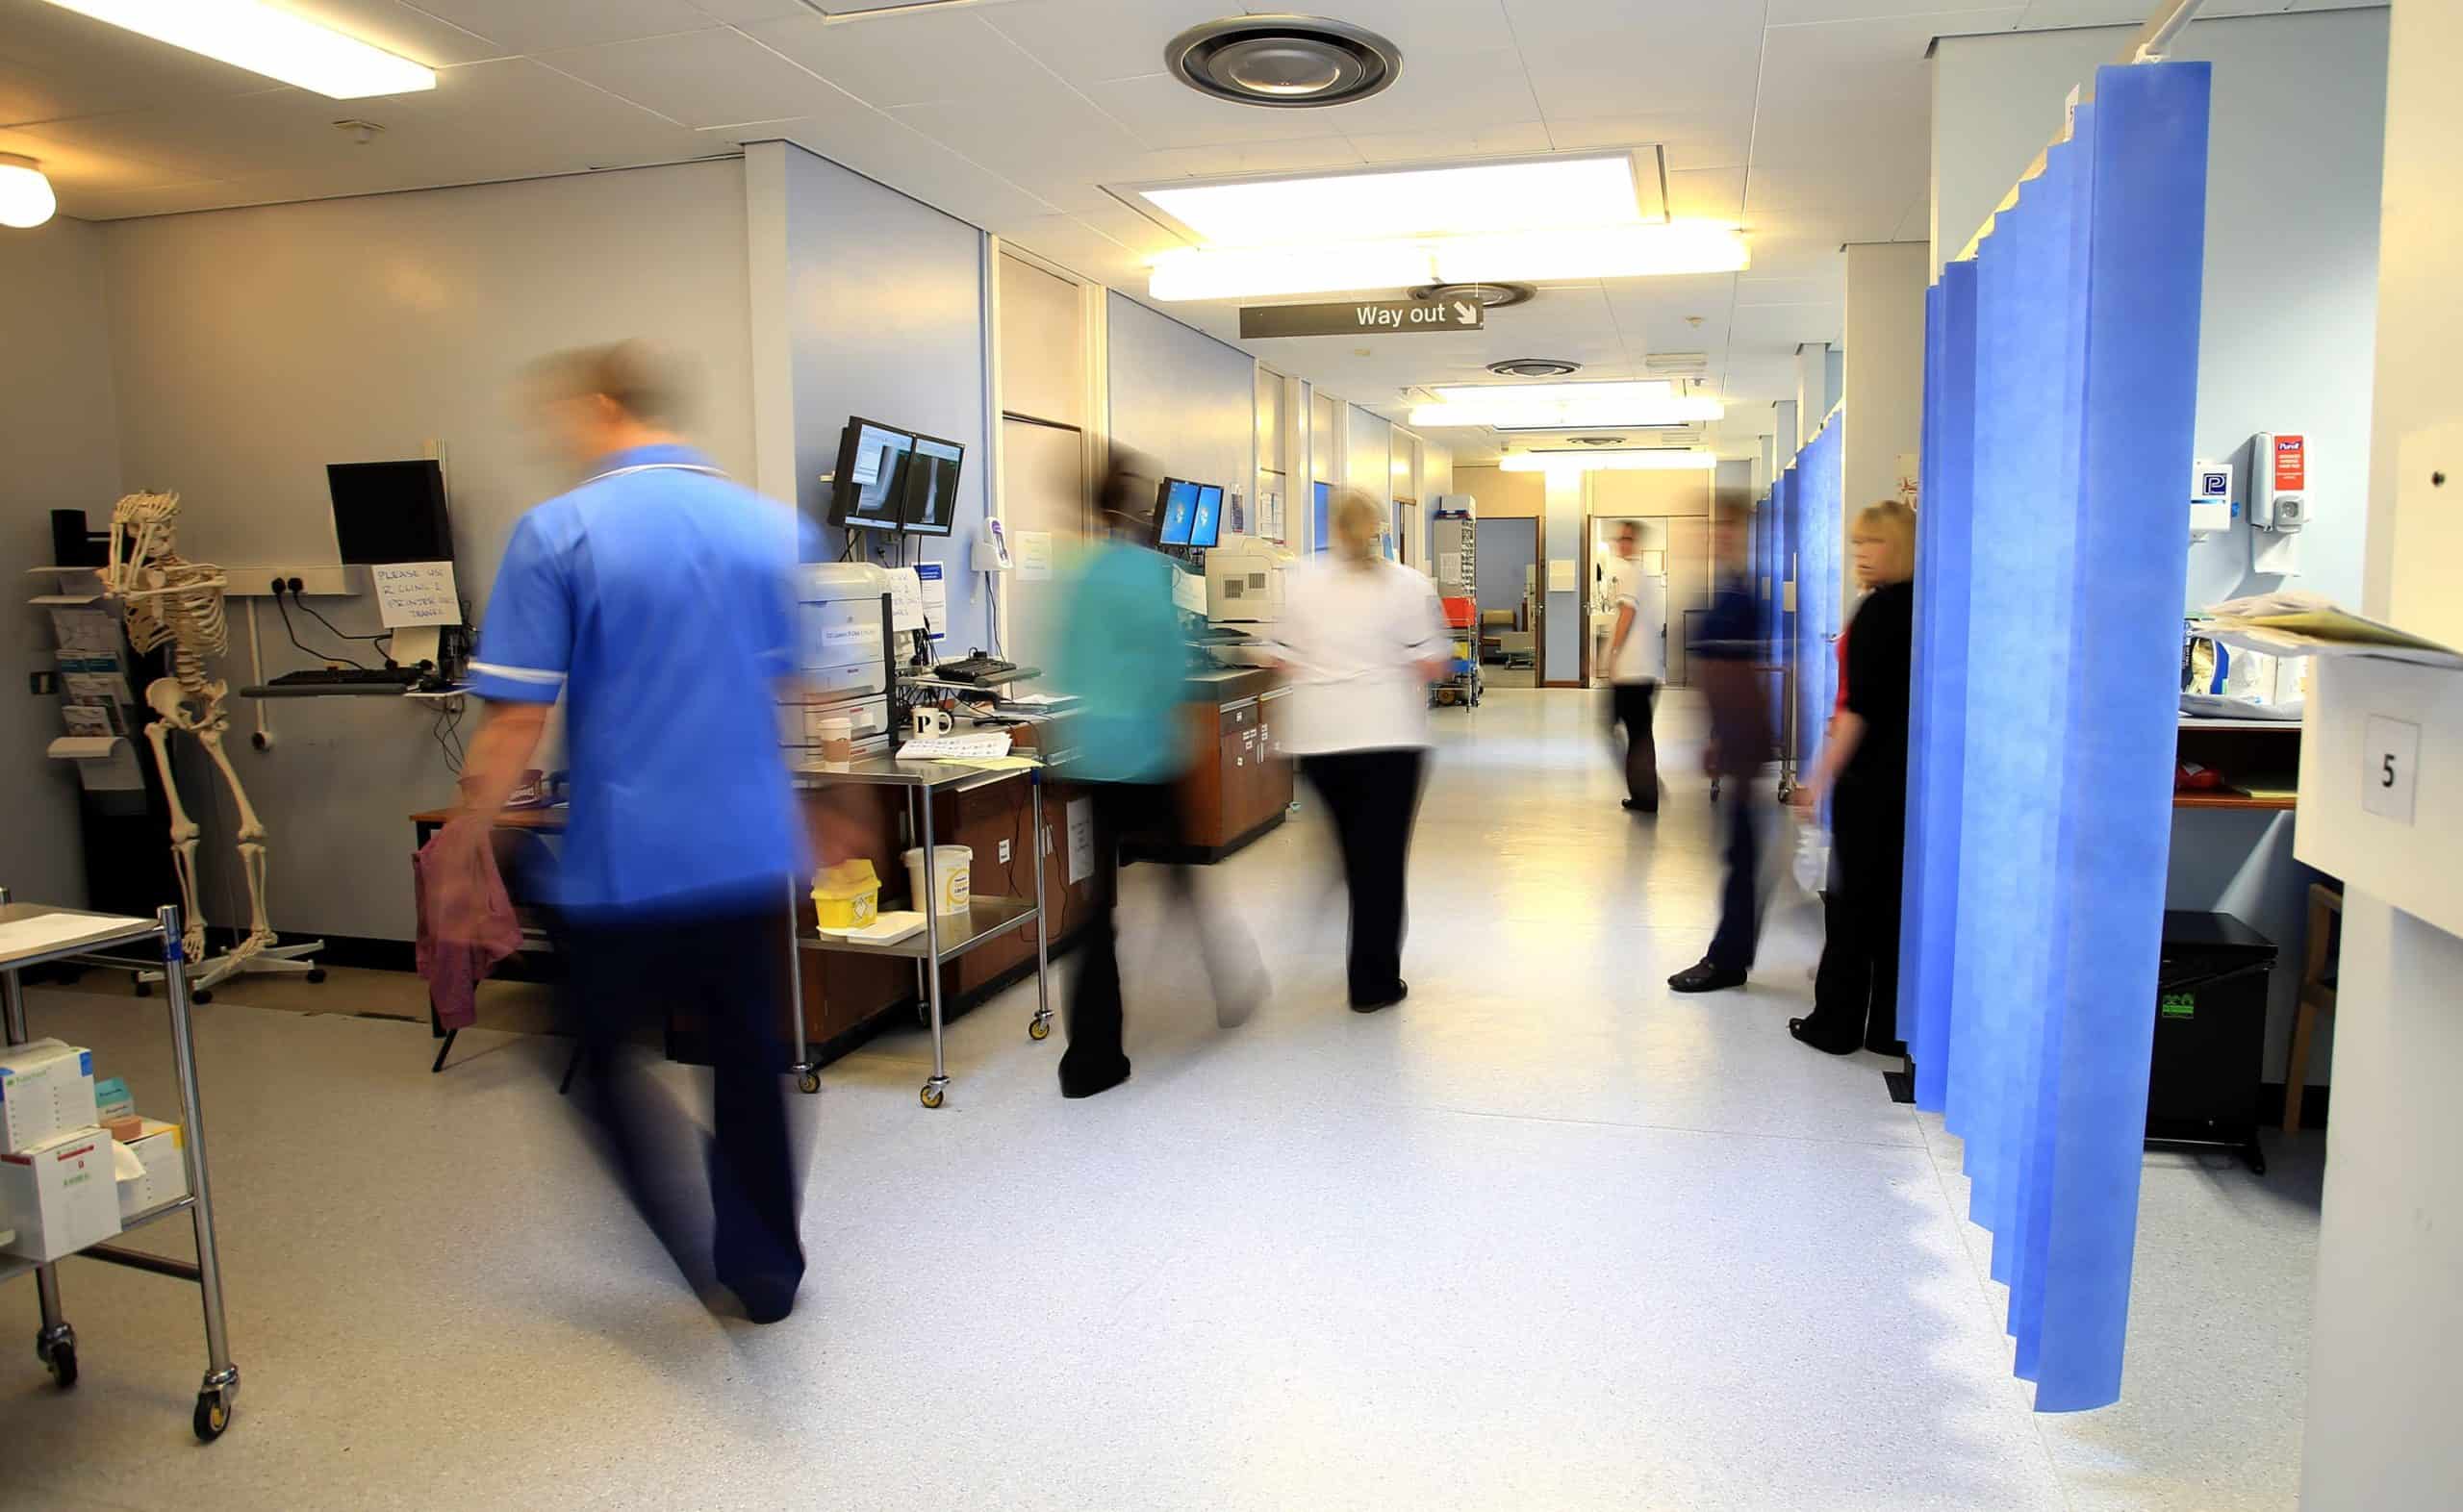 Nearly 15,000 children’s operations cancelled last year